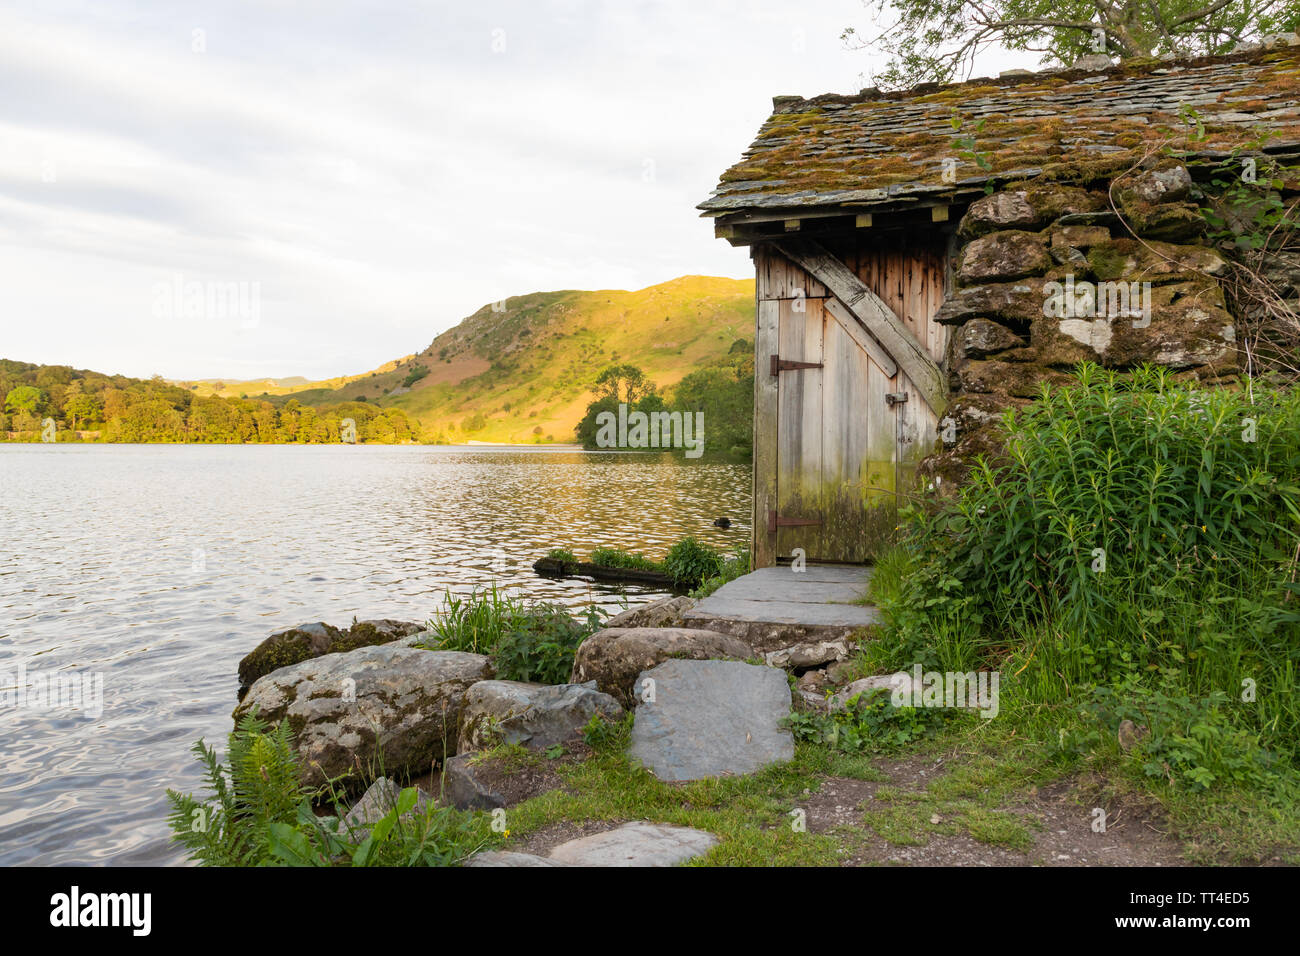 Grasmere, Lake District, Cumbria, UK: A stone boathouse with slate roof and wooden door on the side of Grasmere with Loughrigg Fell in the background. Stock Photo